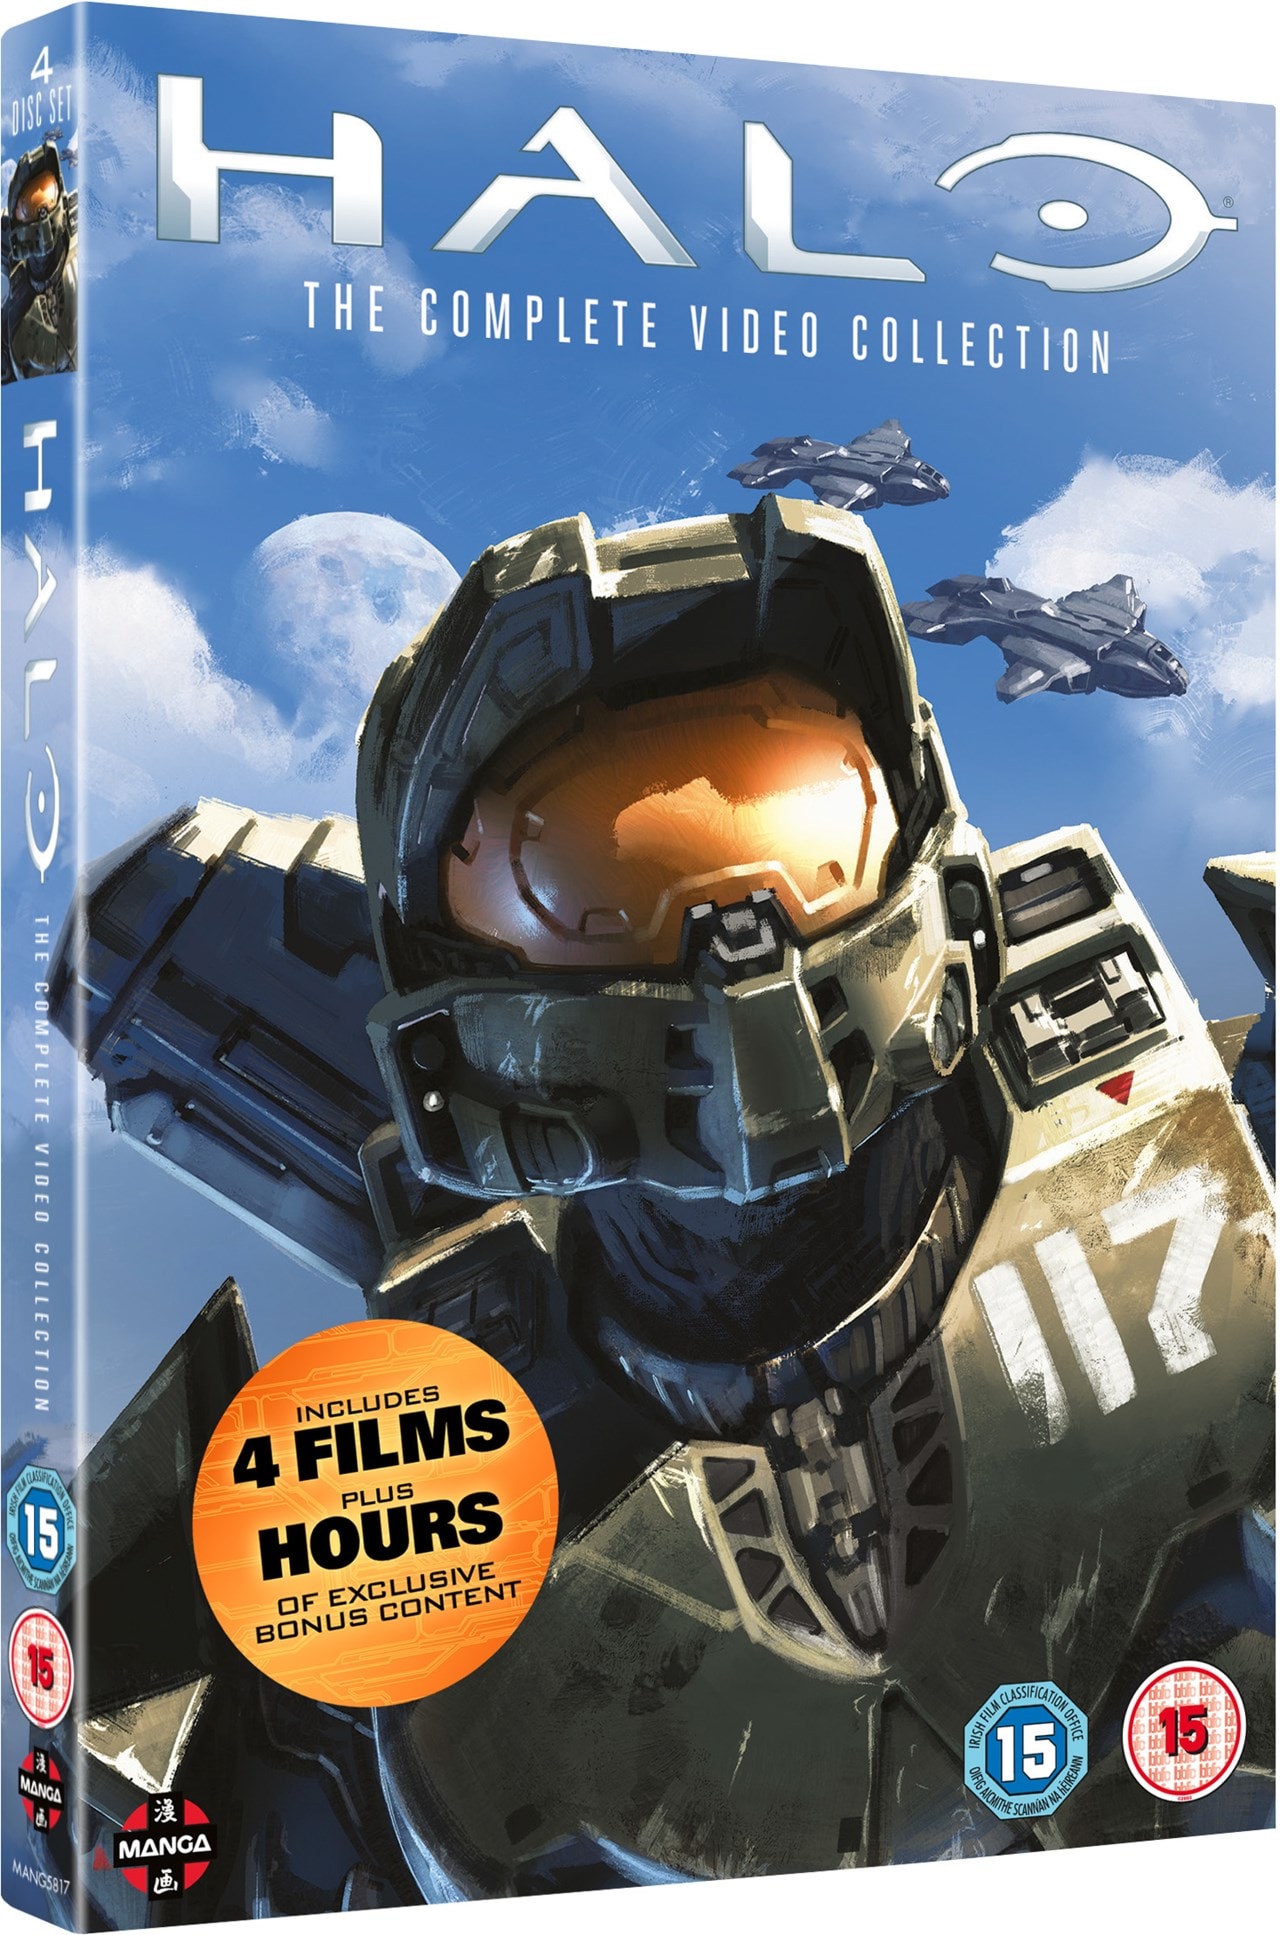 Halo: The Complete Video Collection | DVD Box Set | Free shipping over ...